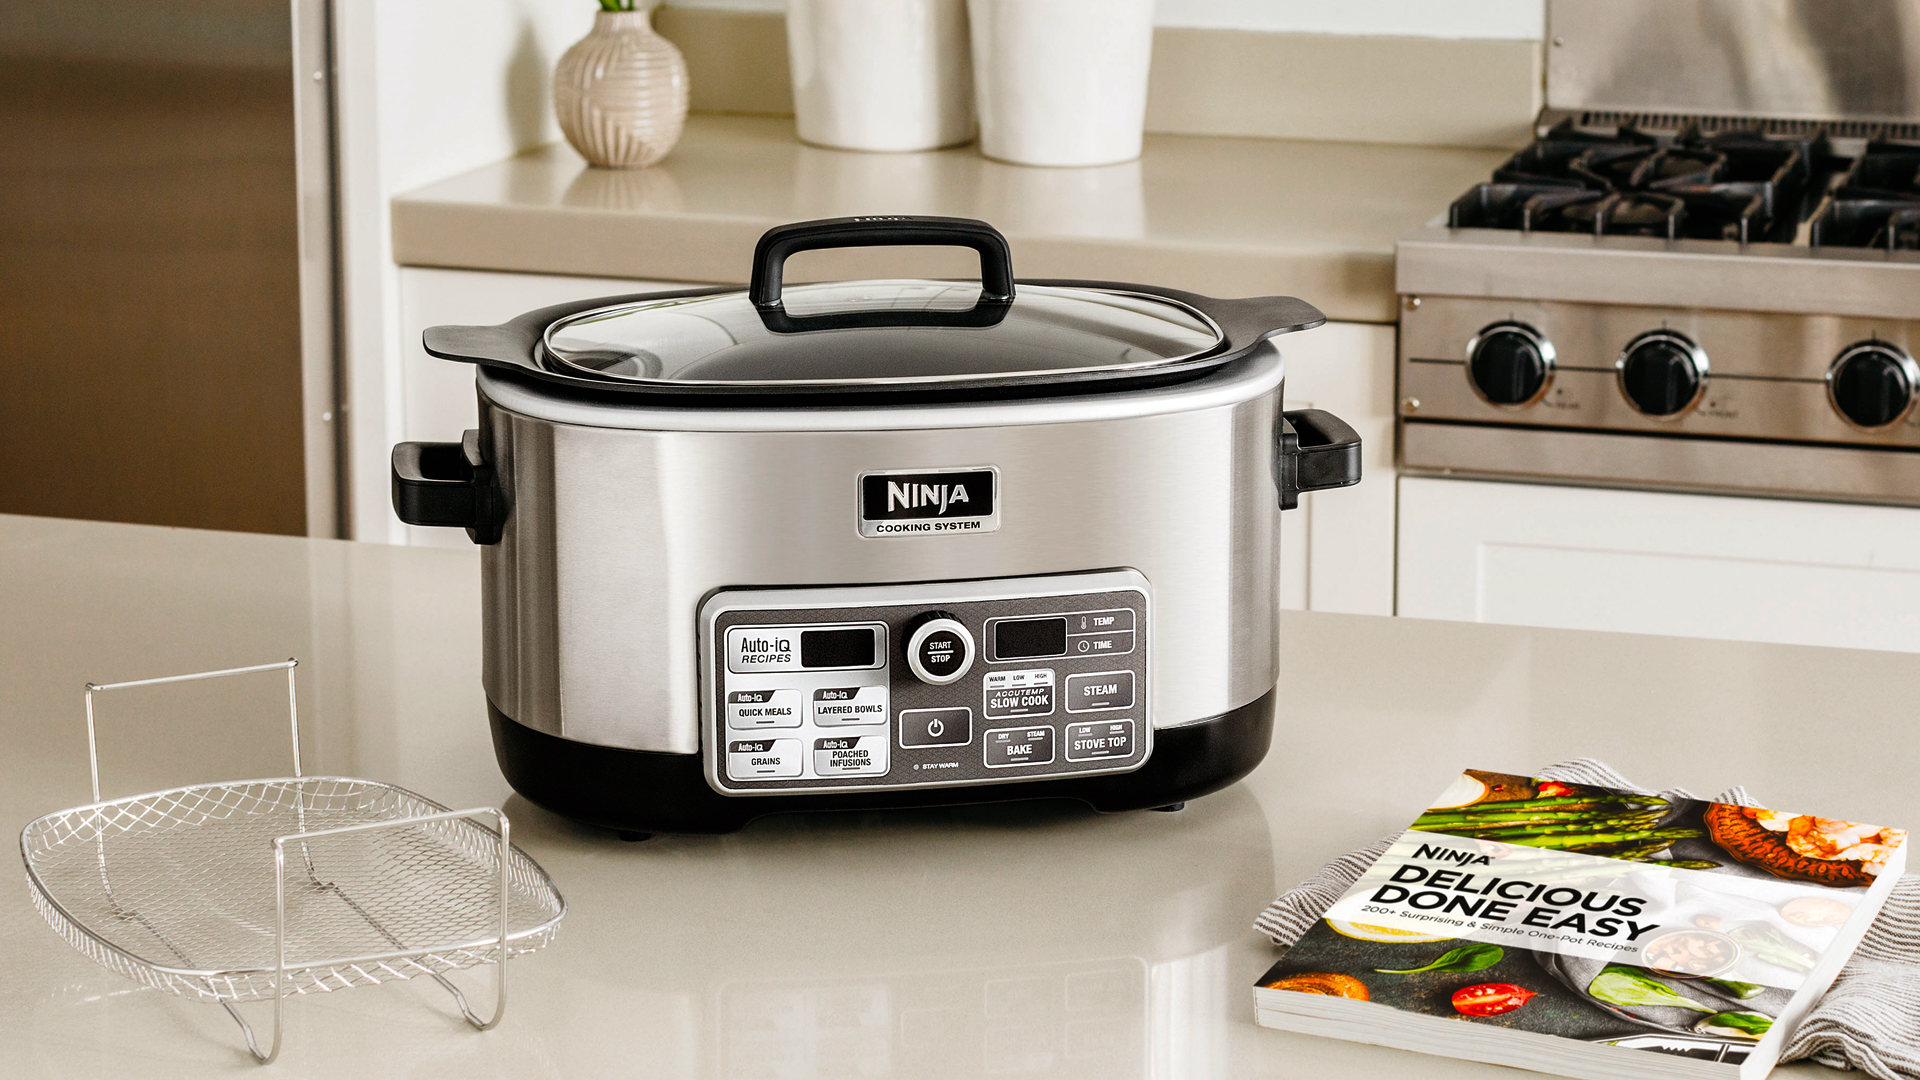 Ninja Cooking System with Auto-iQ, Gadget Reviews